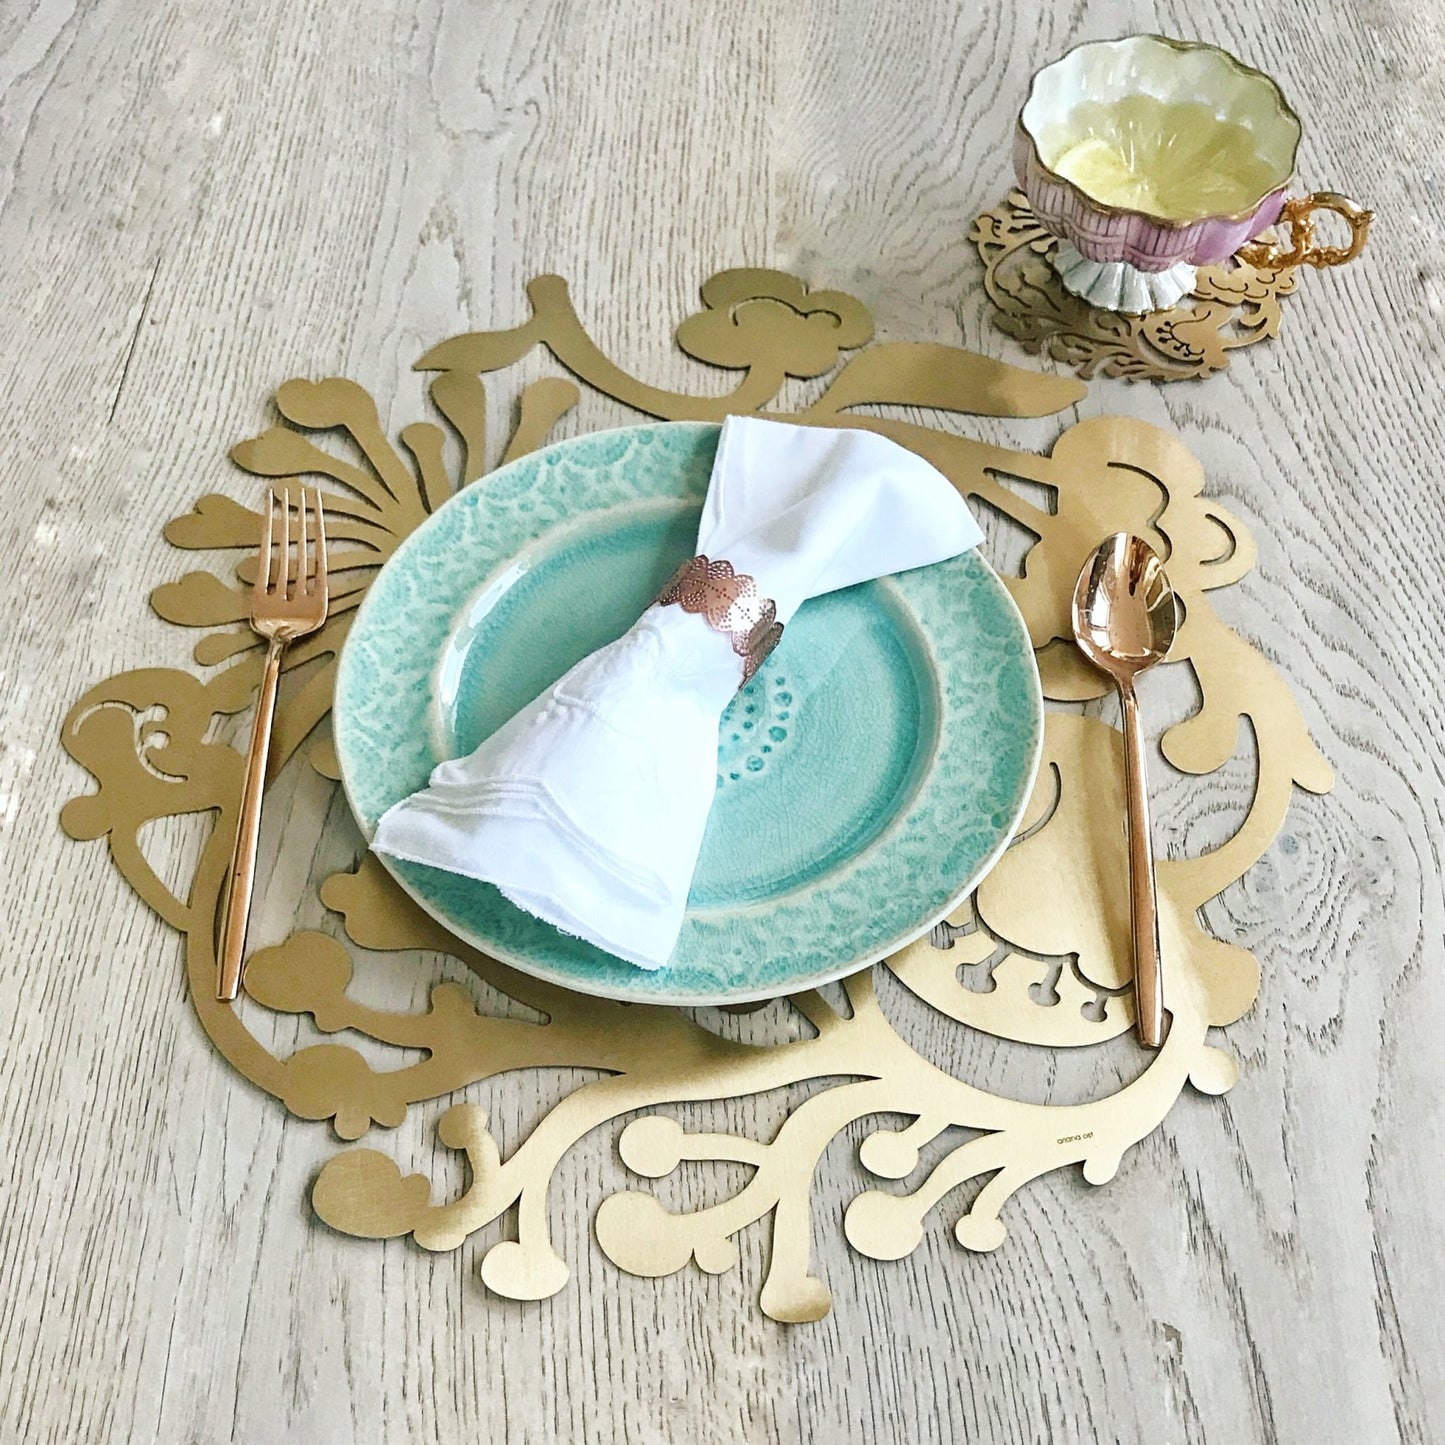 Floral Wreath Placemat Charger - Ariana Ost